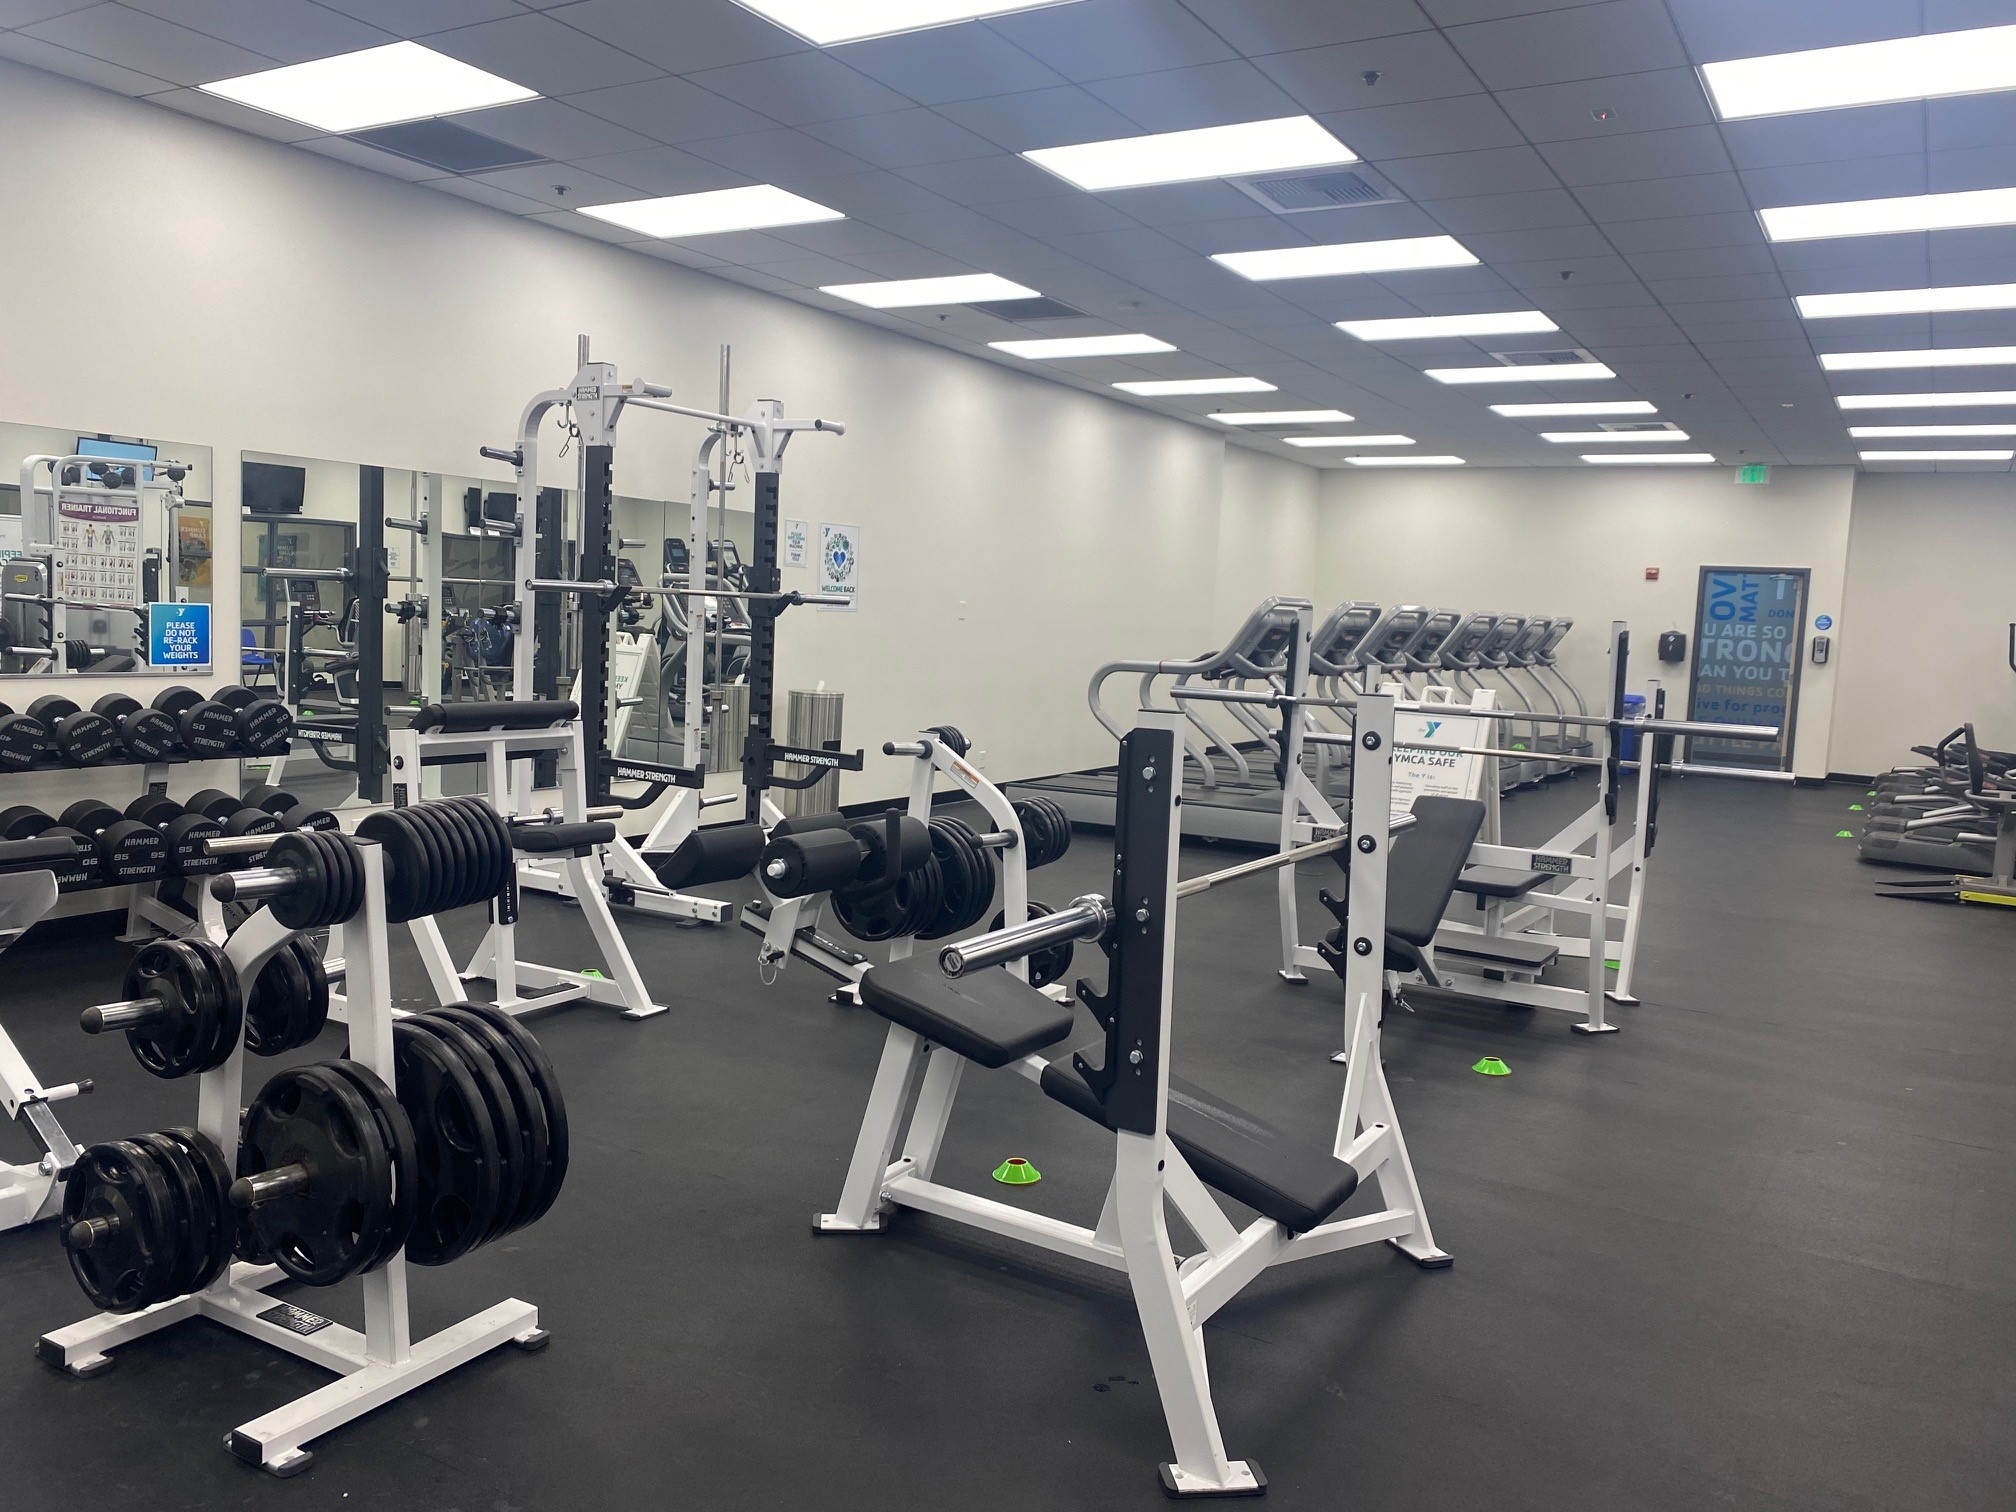 Indoor Fitness Facility Simi Valley